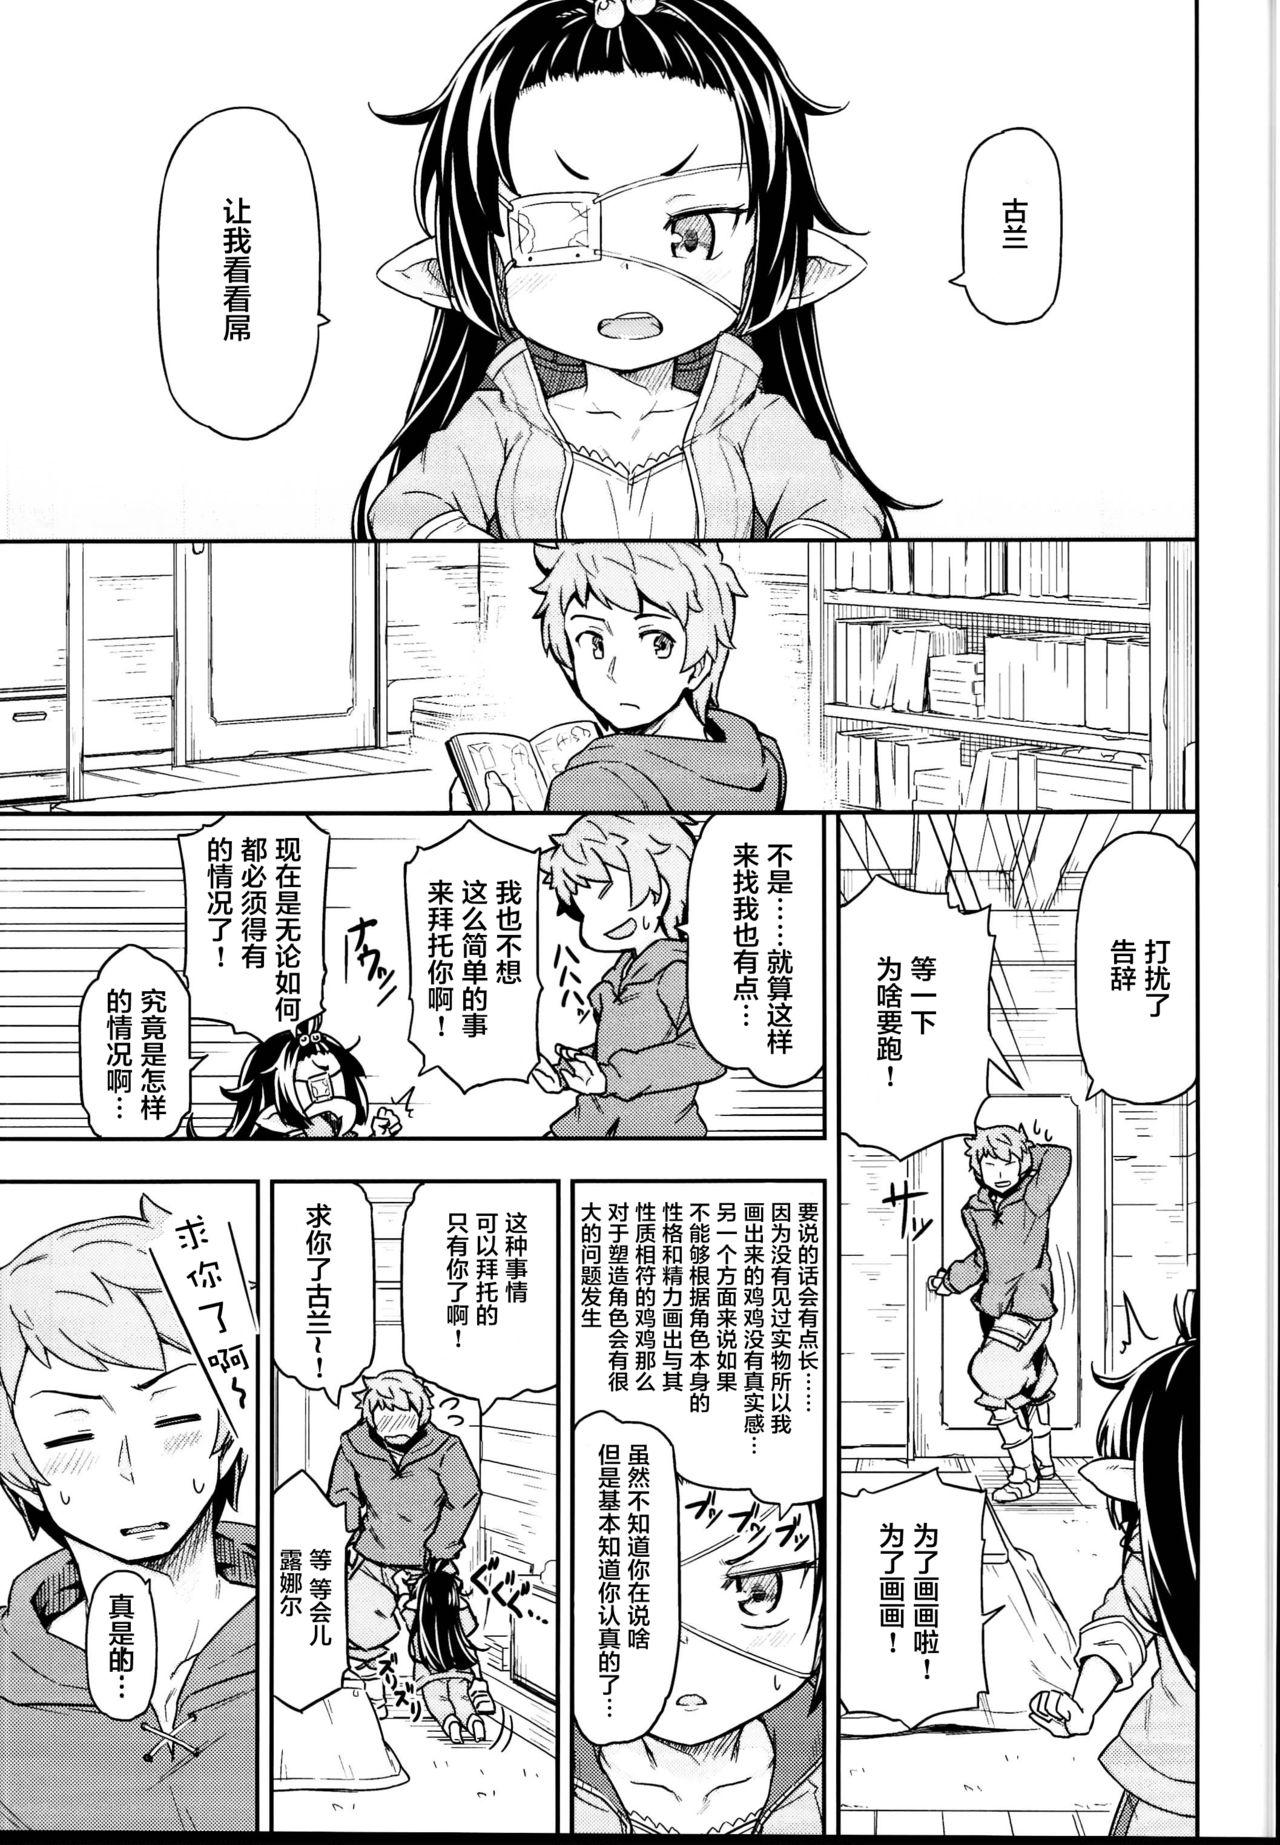 Spit Lunalu no Usui Book - Granblue fantasy Ass To Mouth - Page 6